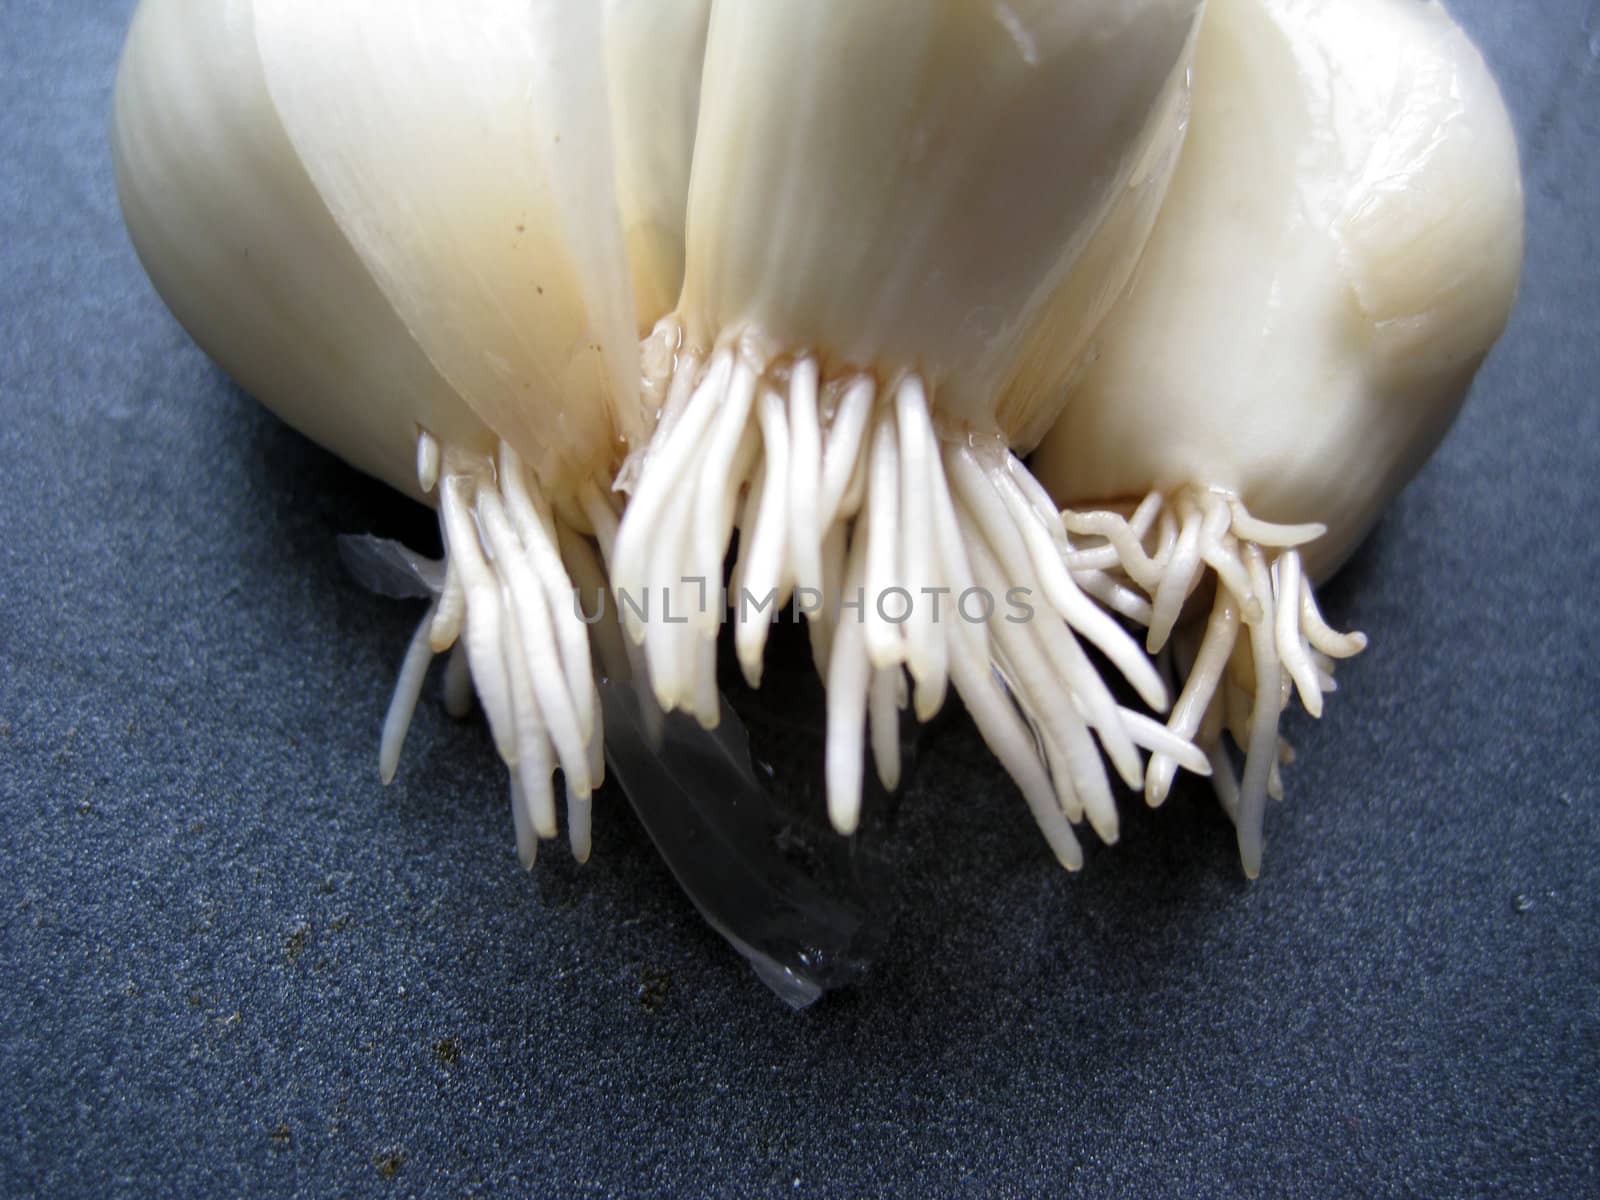 a close up view for garlic root